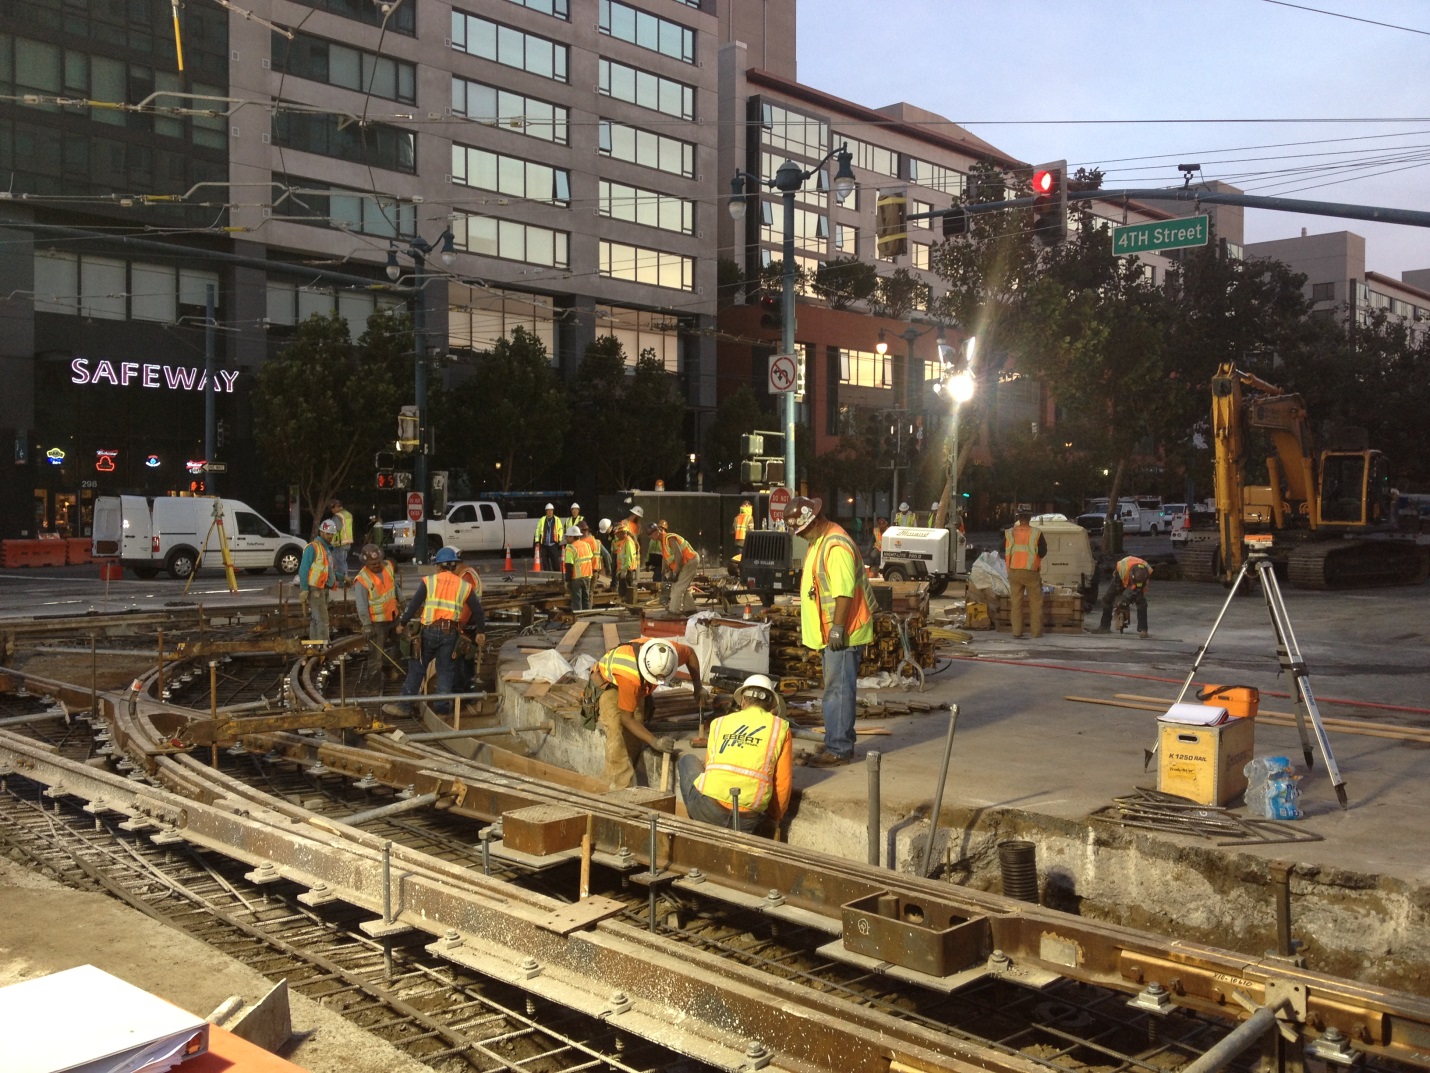 Crews in orange safety vests and hard hats work in the 4th/King trackway under large lamps at sunset with "Safeway" sign in the background.